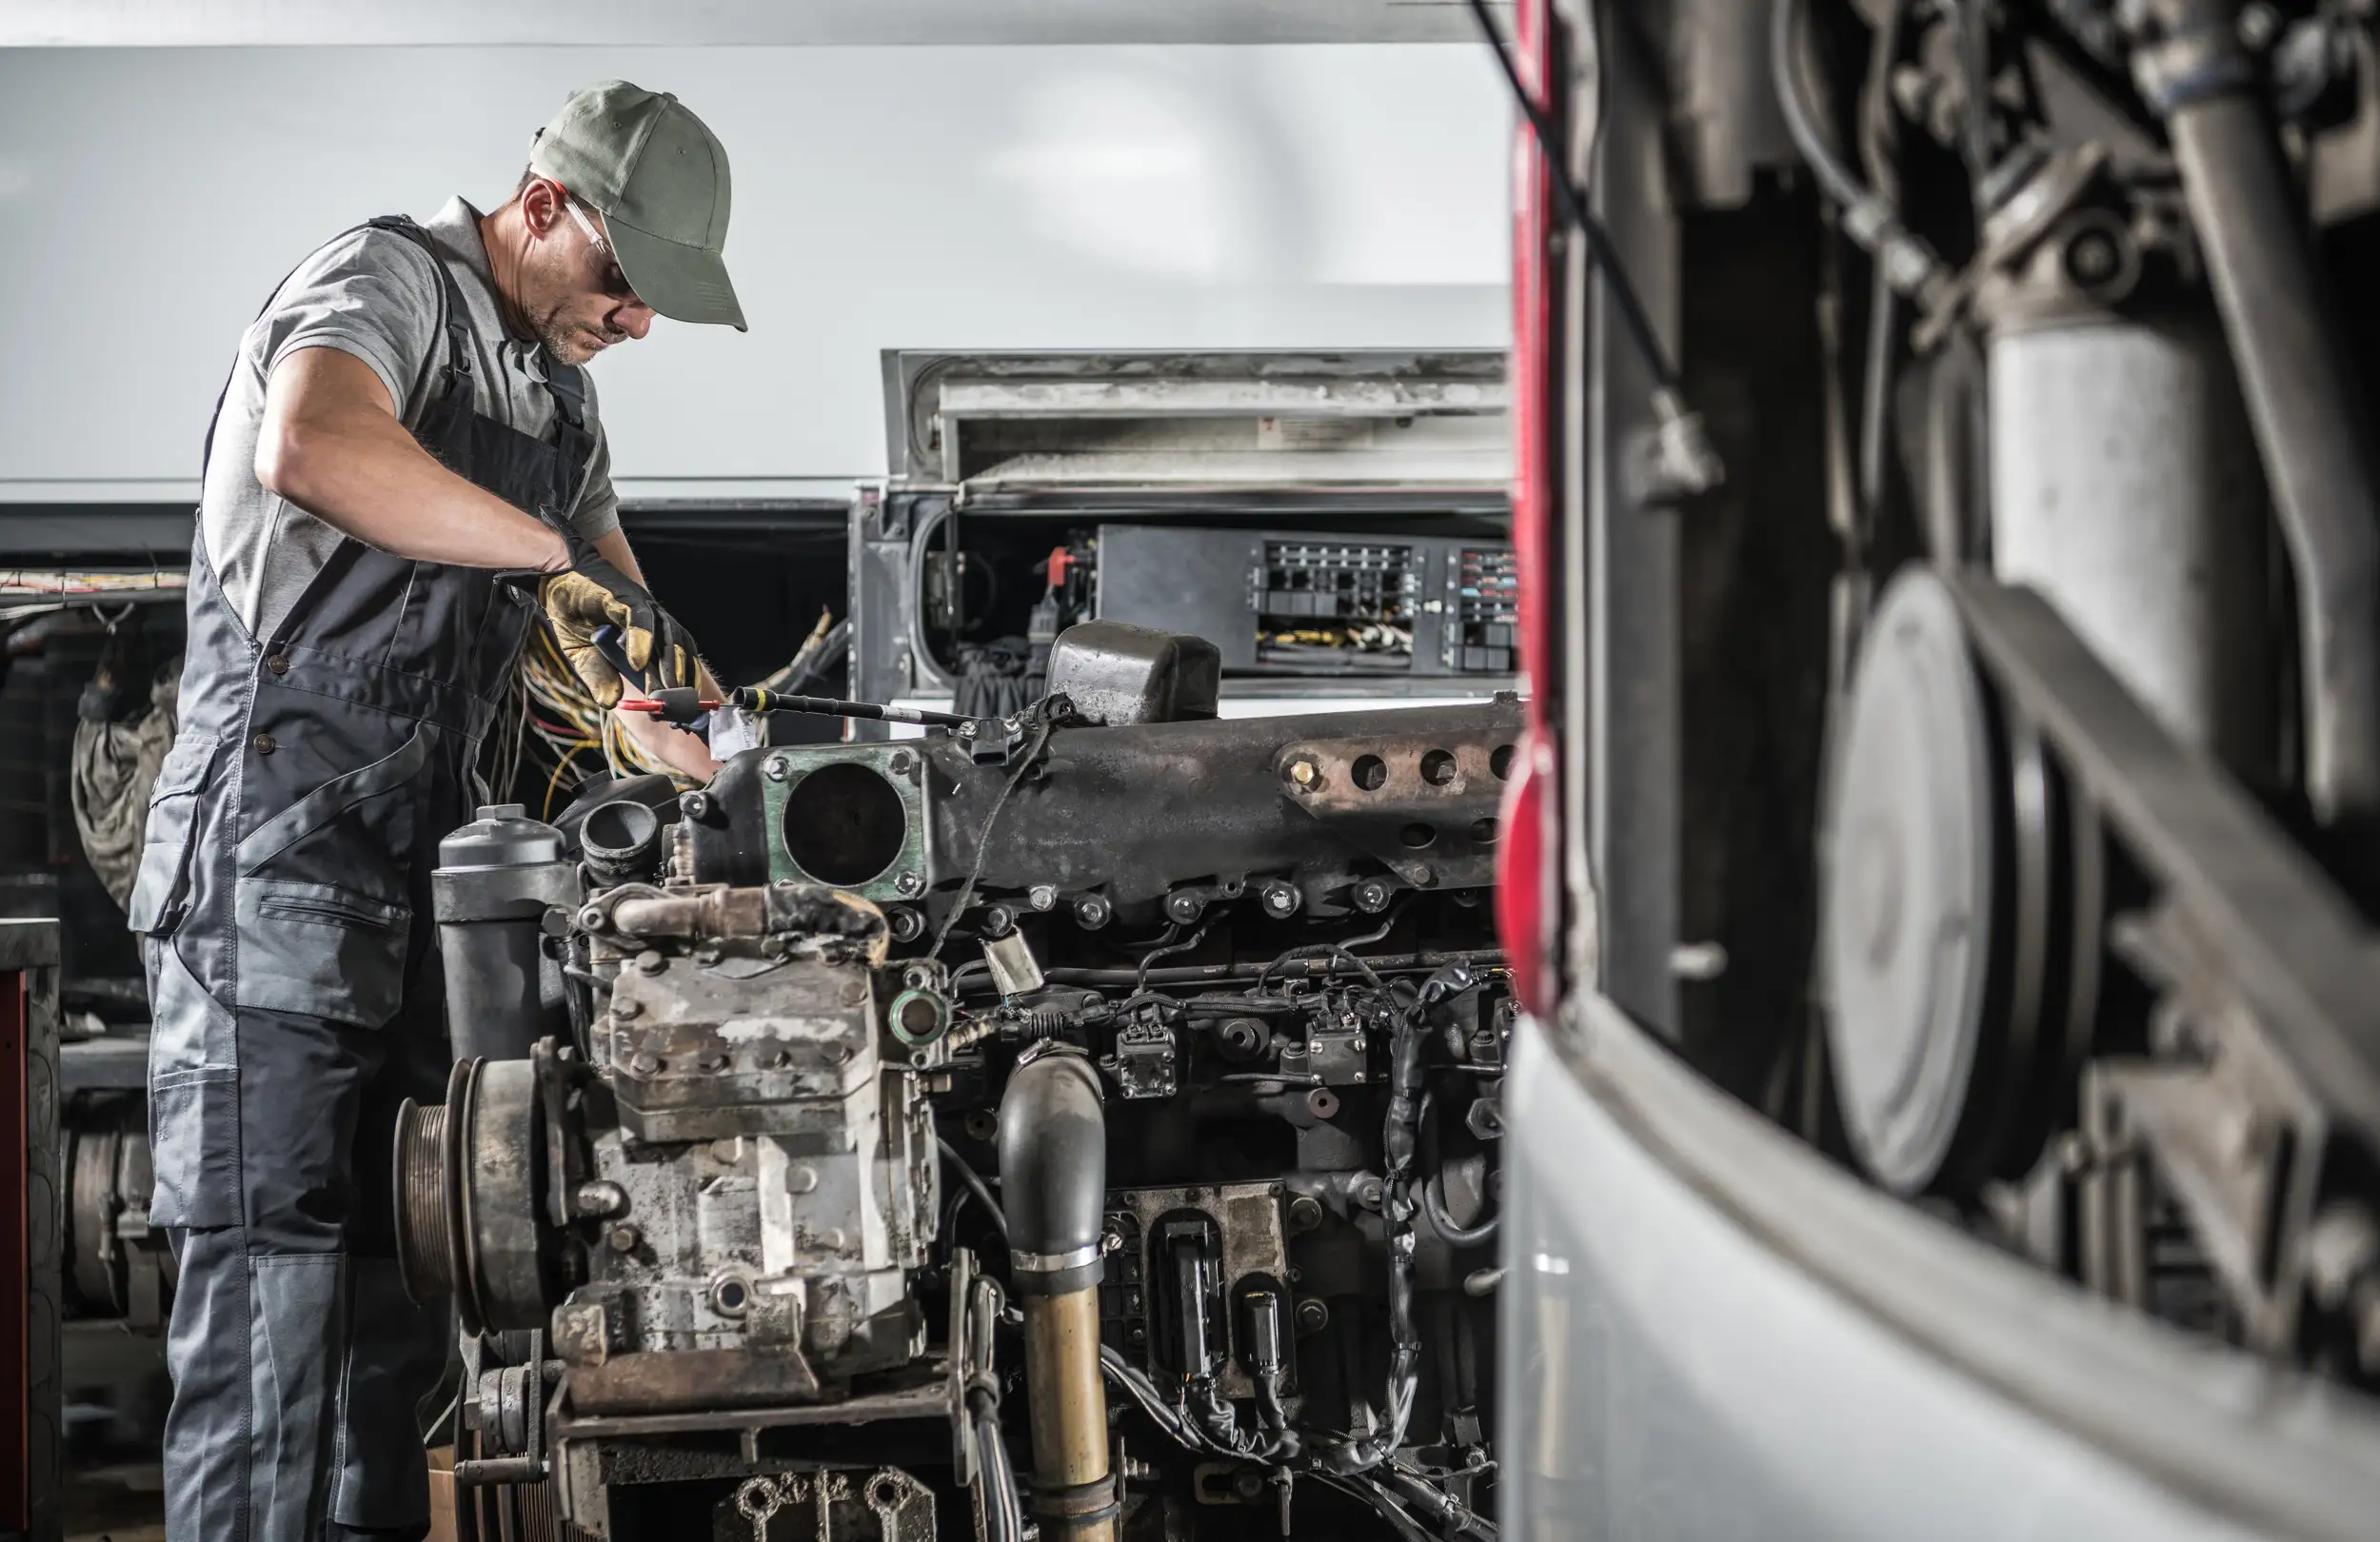 An image of a uniformed mechanic fixing the wirings and checking the parts from a trailer truck.